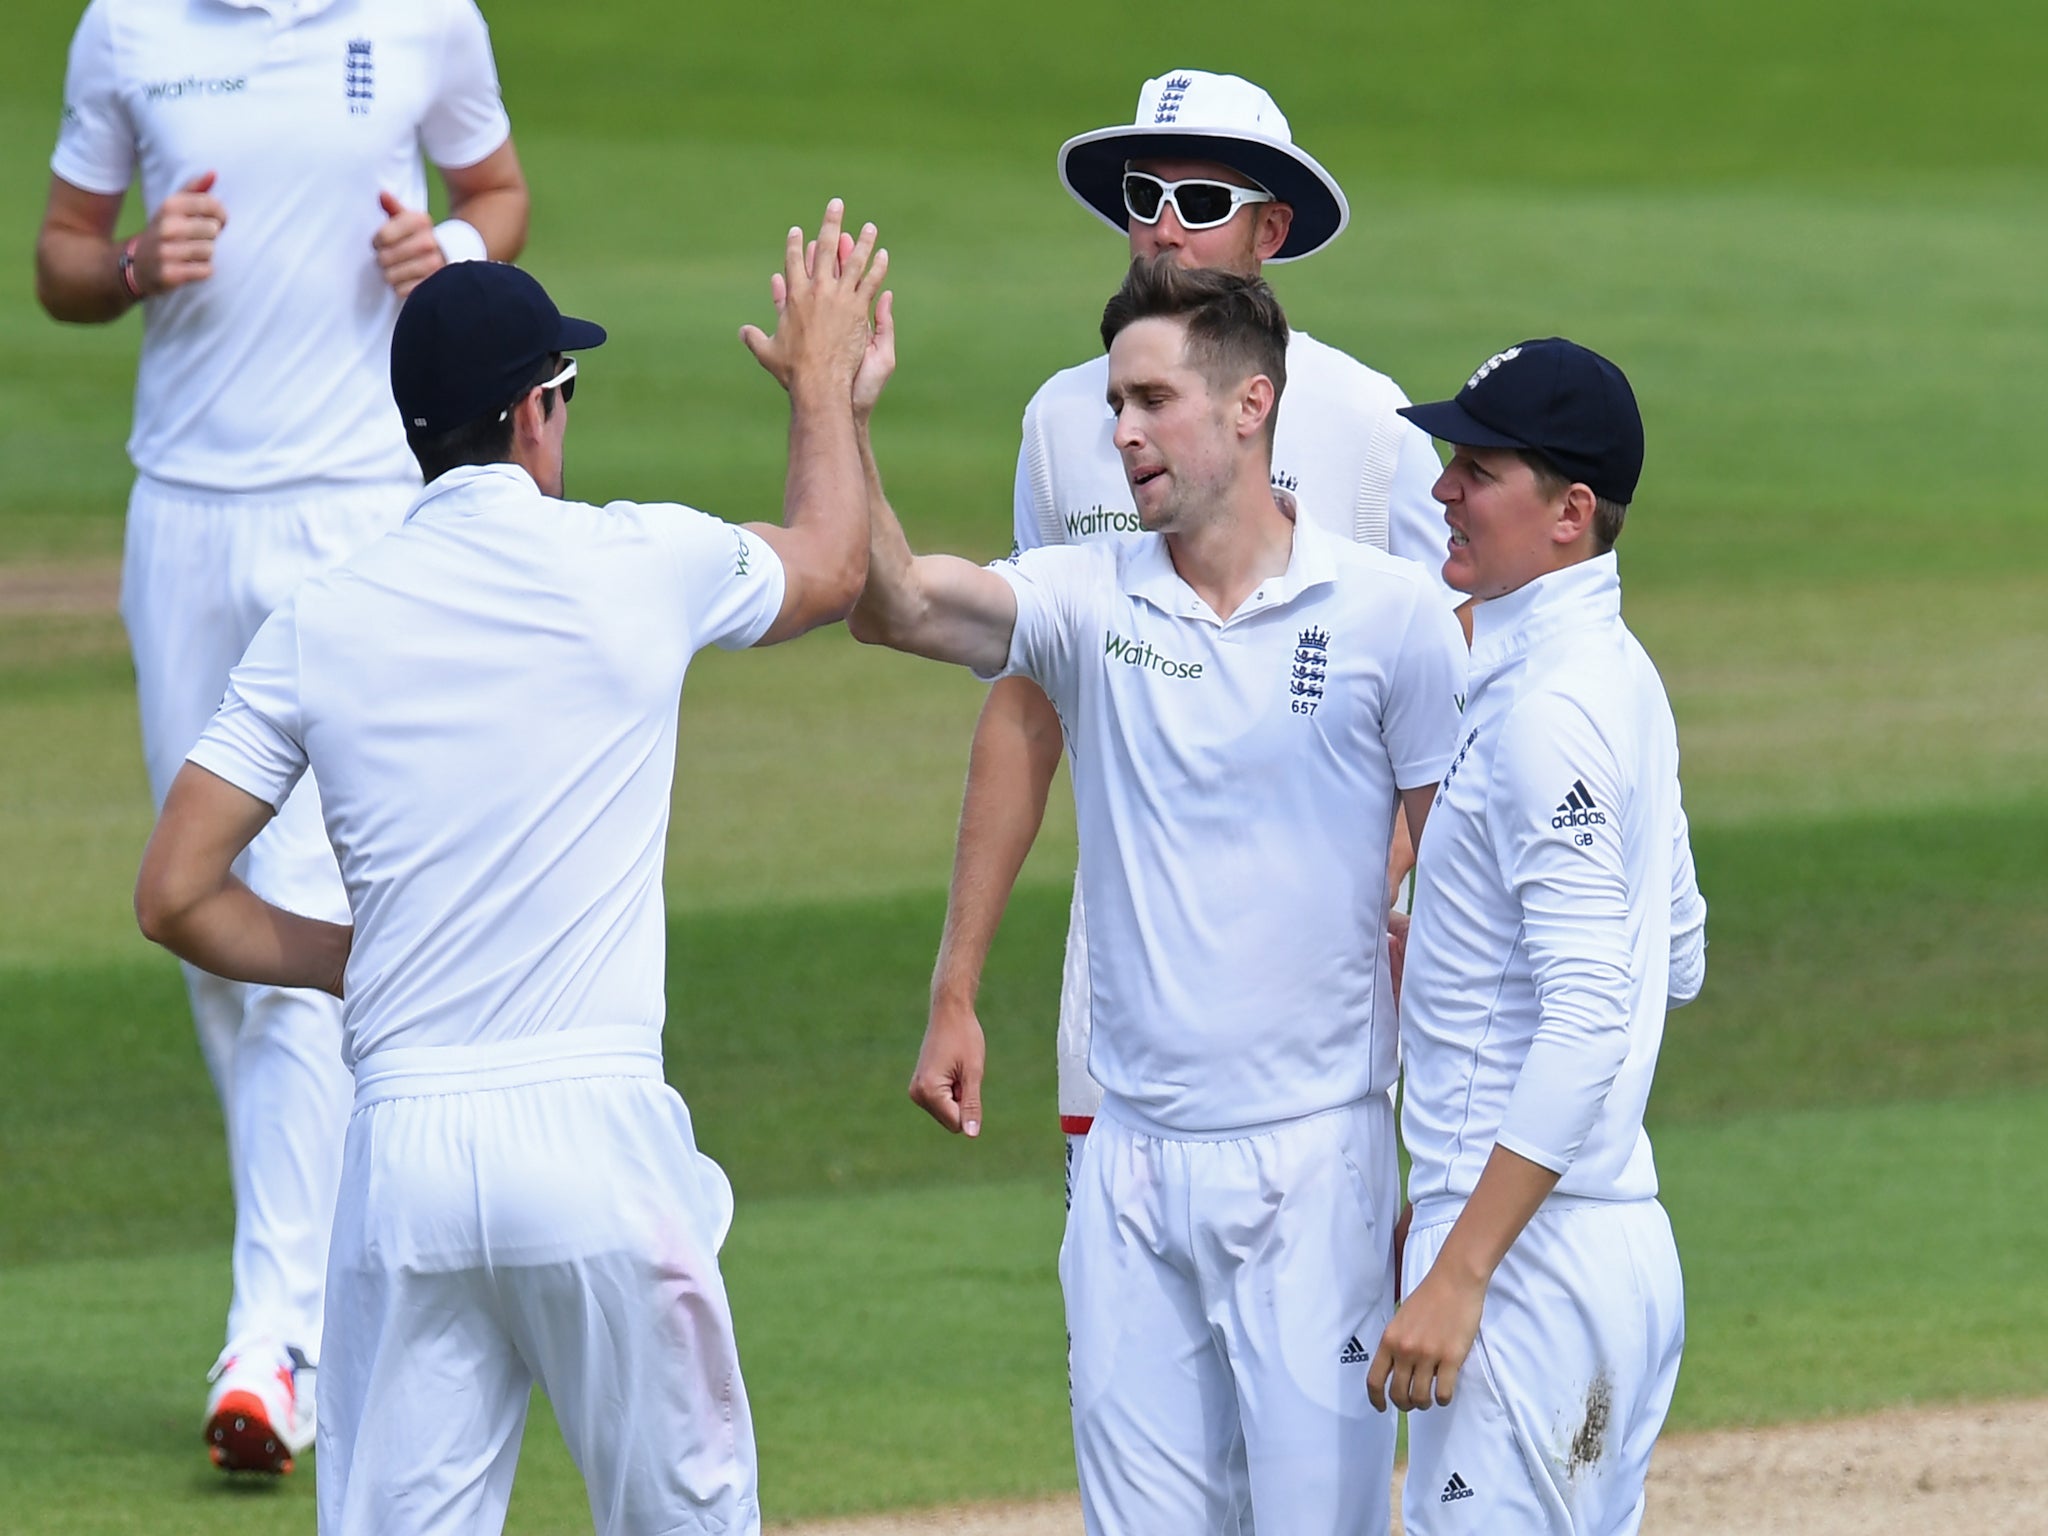 Chris Woakes celebrates after taking the wicket of Pakistan's Younis Khan